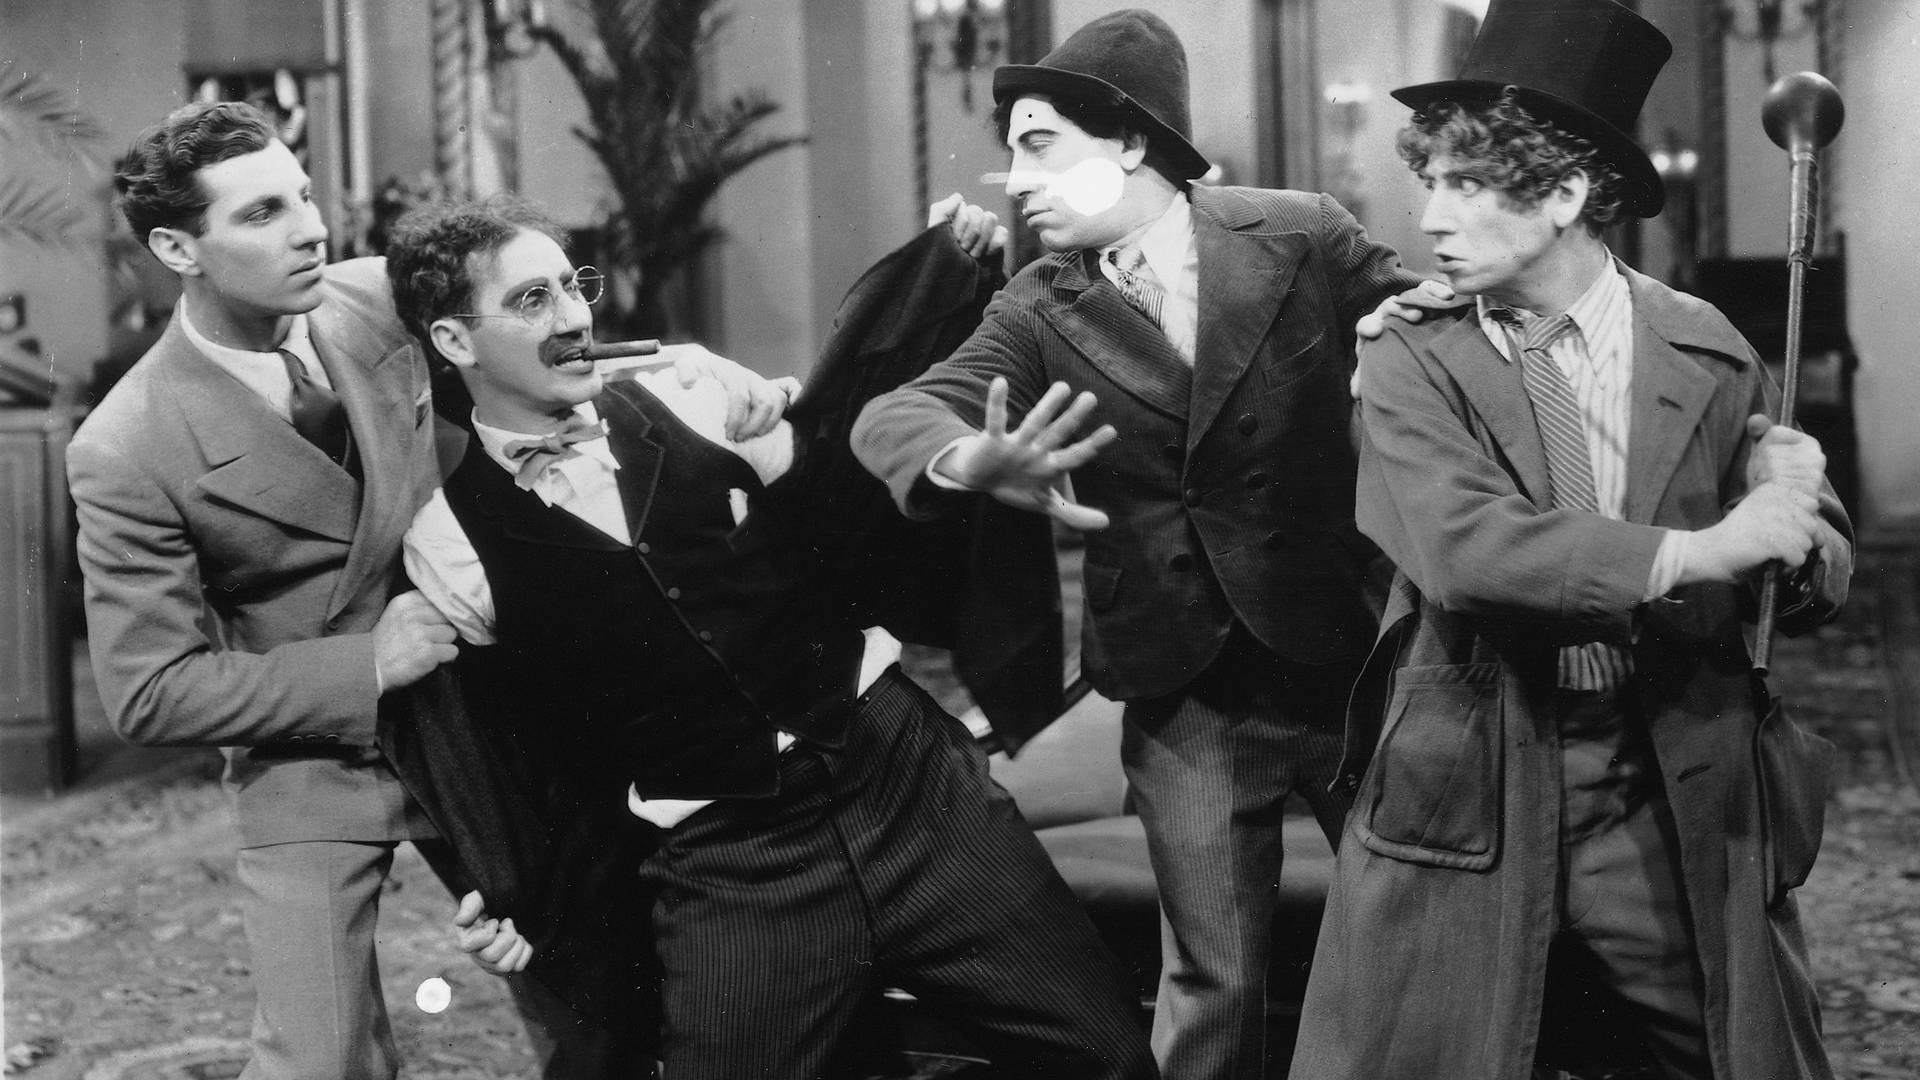 Marxbrothers I En Sketch - Translated To Swedish Means 